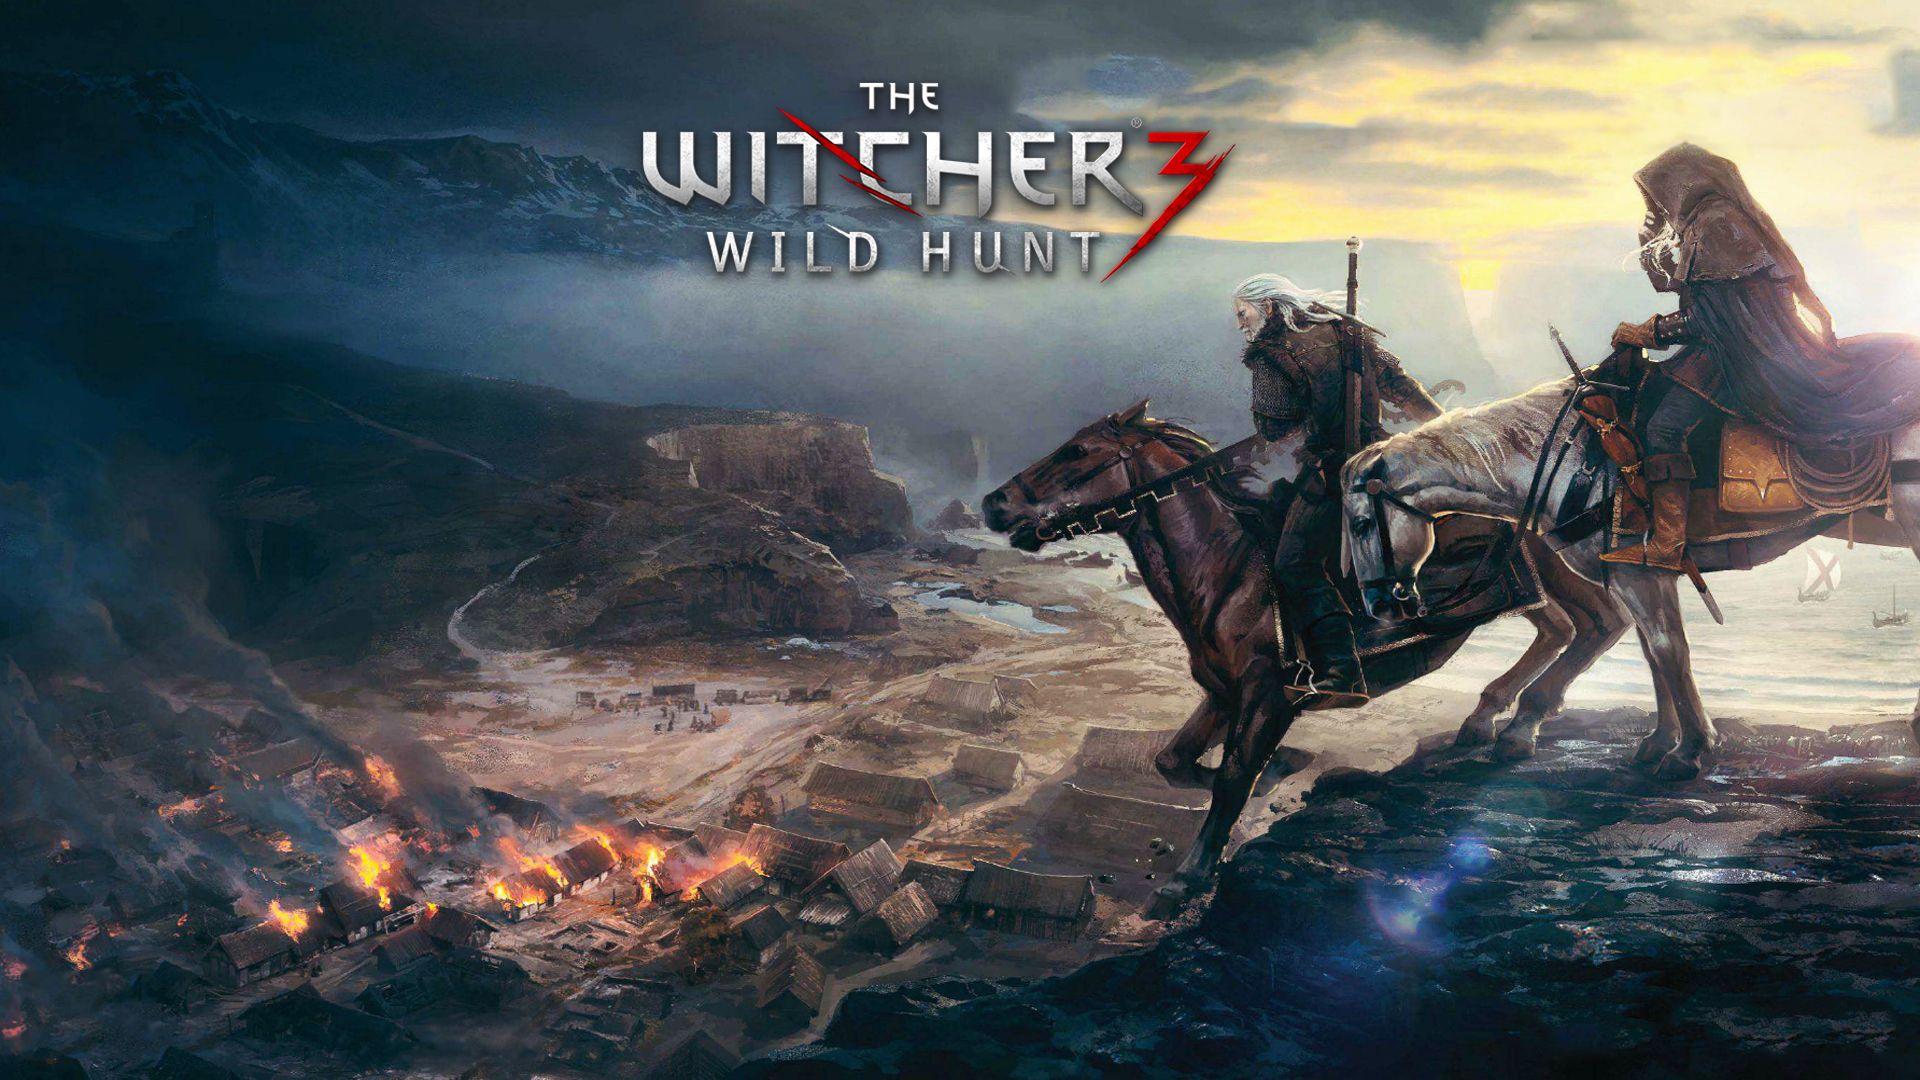 the witcher 3 wild hunt wallpapers 1080p Wallpapers